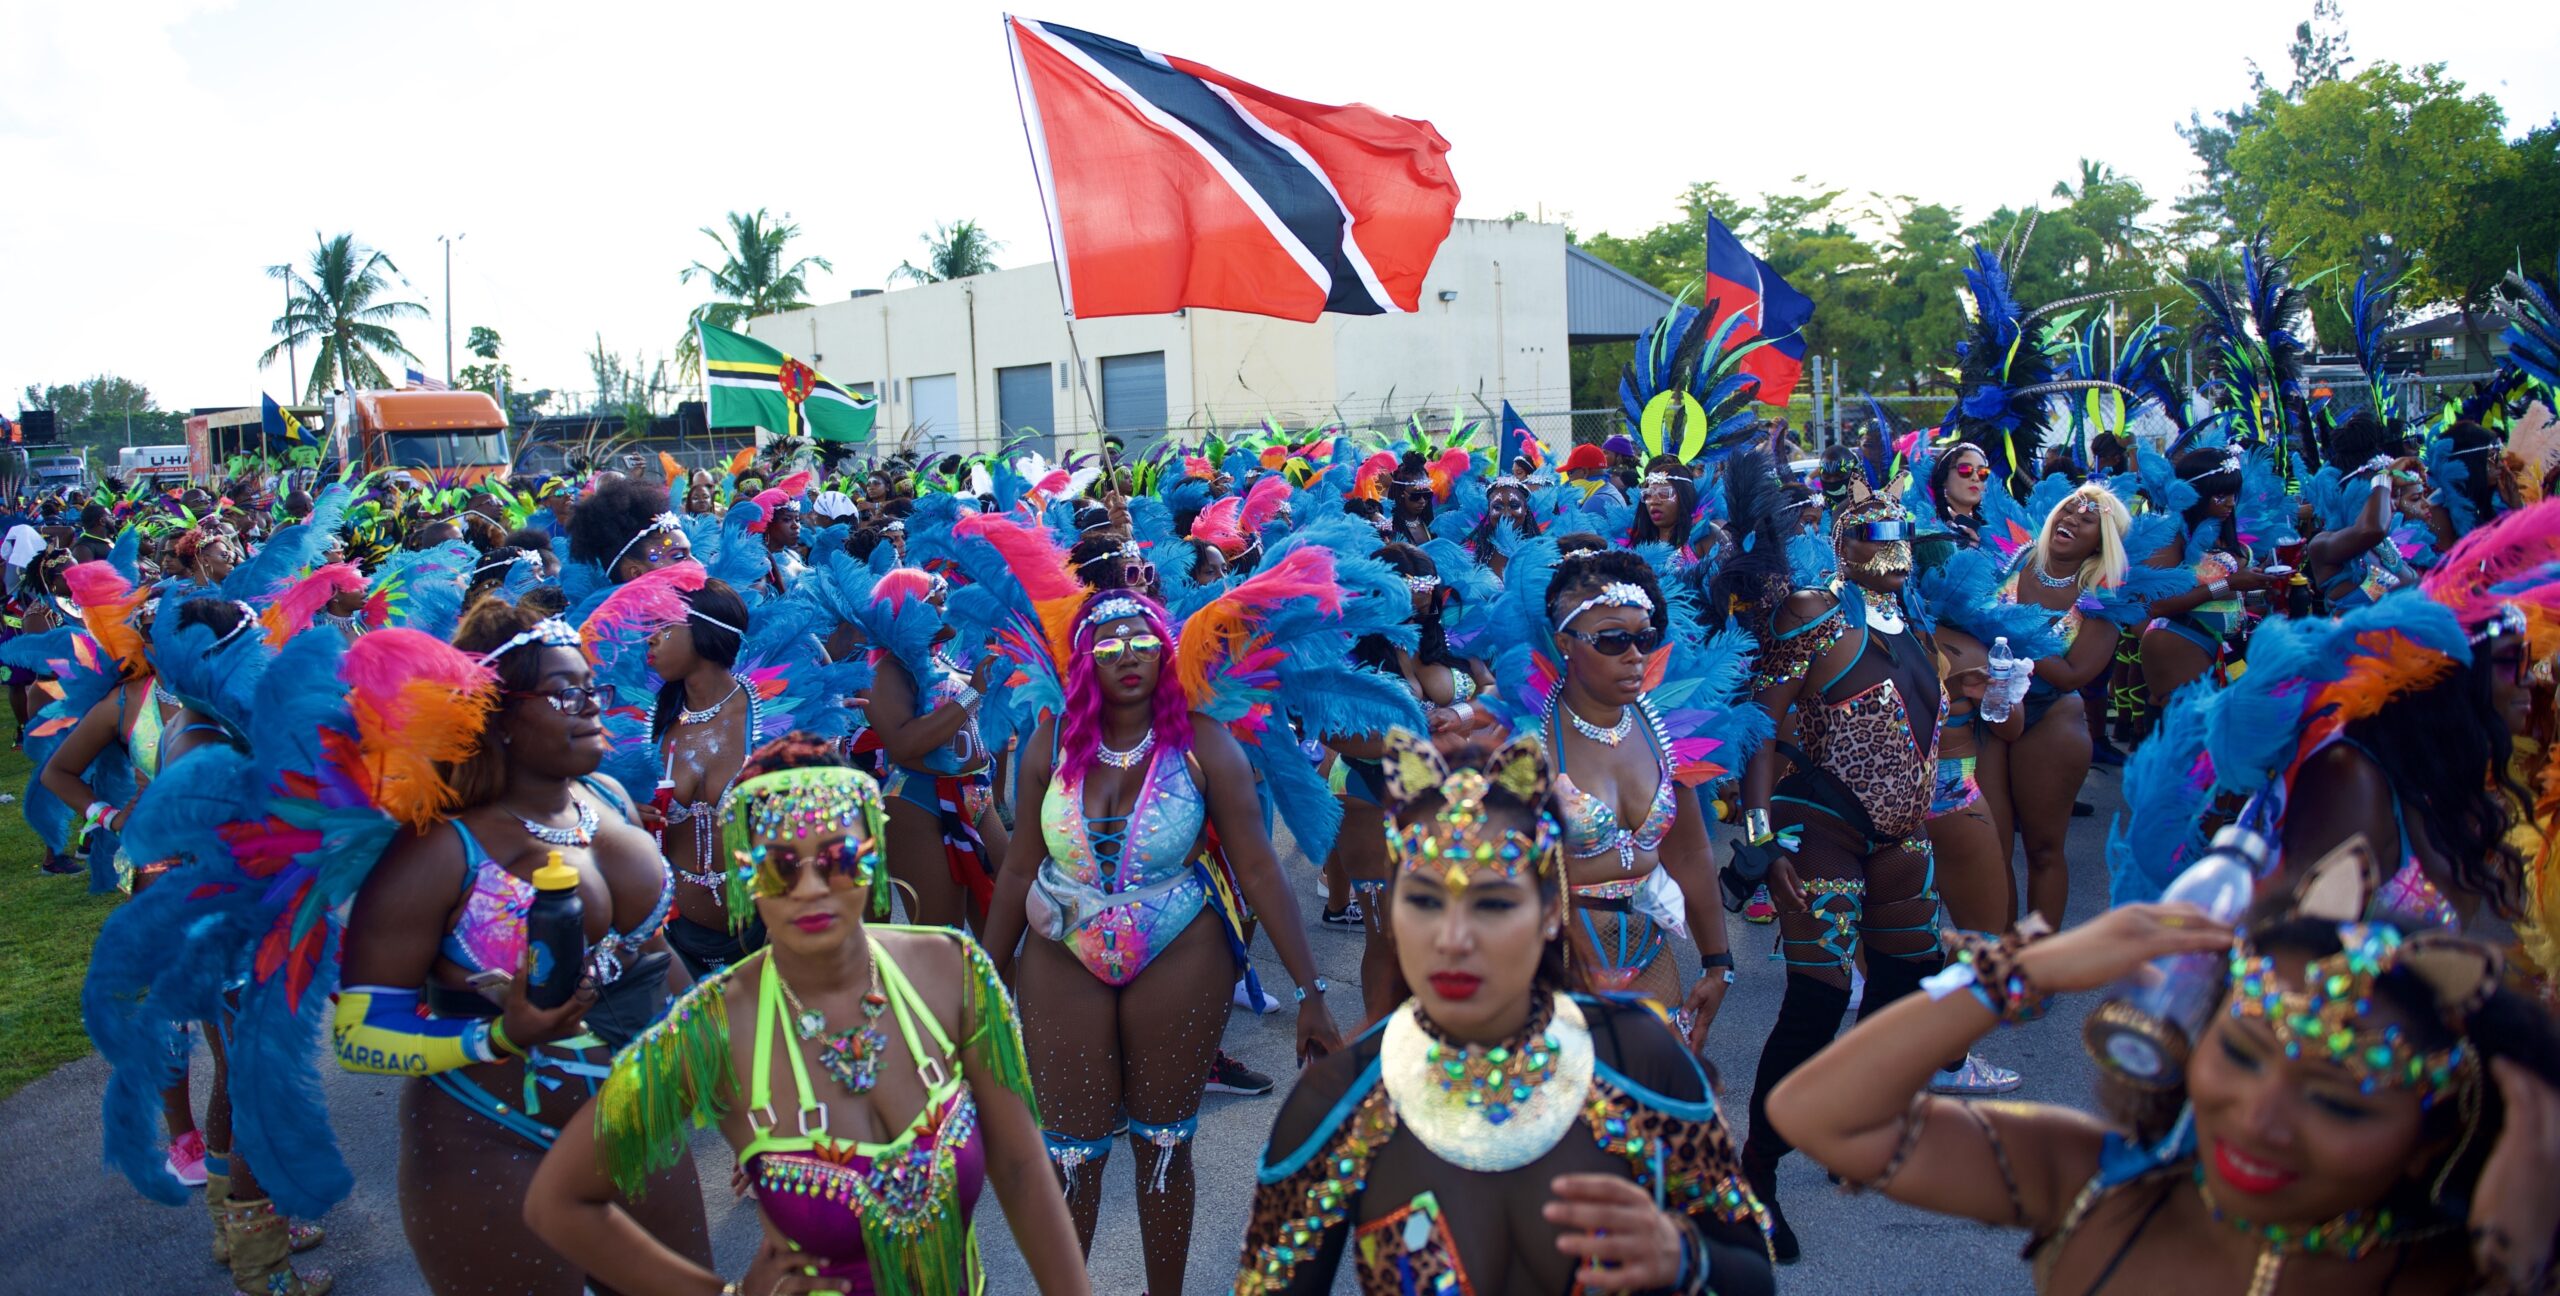 Blog Archives - Page 2 of 13 - Welcome to Miami Carnival